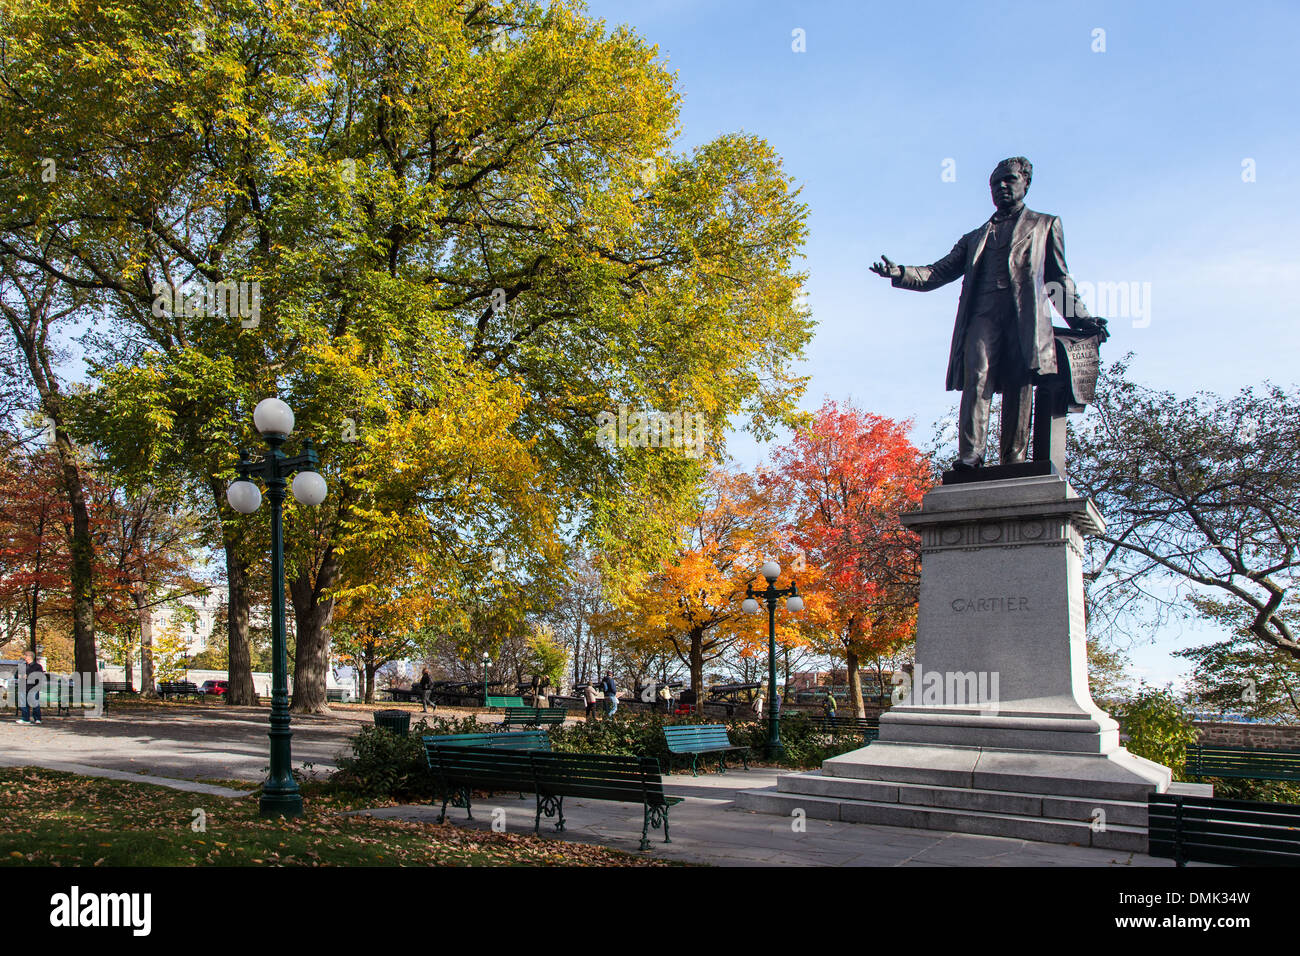 STATUE OF JACQUES CARTIER, FRENCH NAVIGATOR AND EXPLORER WHO DISCOVERED THE SAINT LAWRENCE RIVER IN THE 16TH CENTURY, MONTMORENCY PARK, CITY OF QUEBEC, OLD QUEBEC, INDIAN SUMMER, AUTUMN COLORS, QUEBEC, CANADA Stock Photo